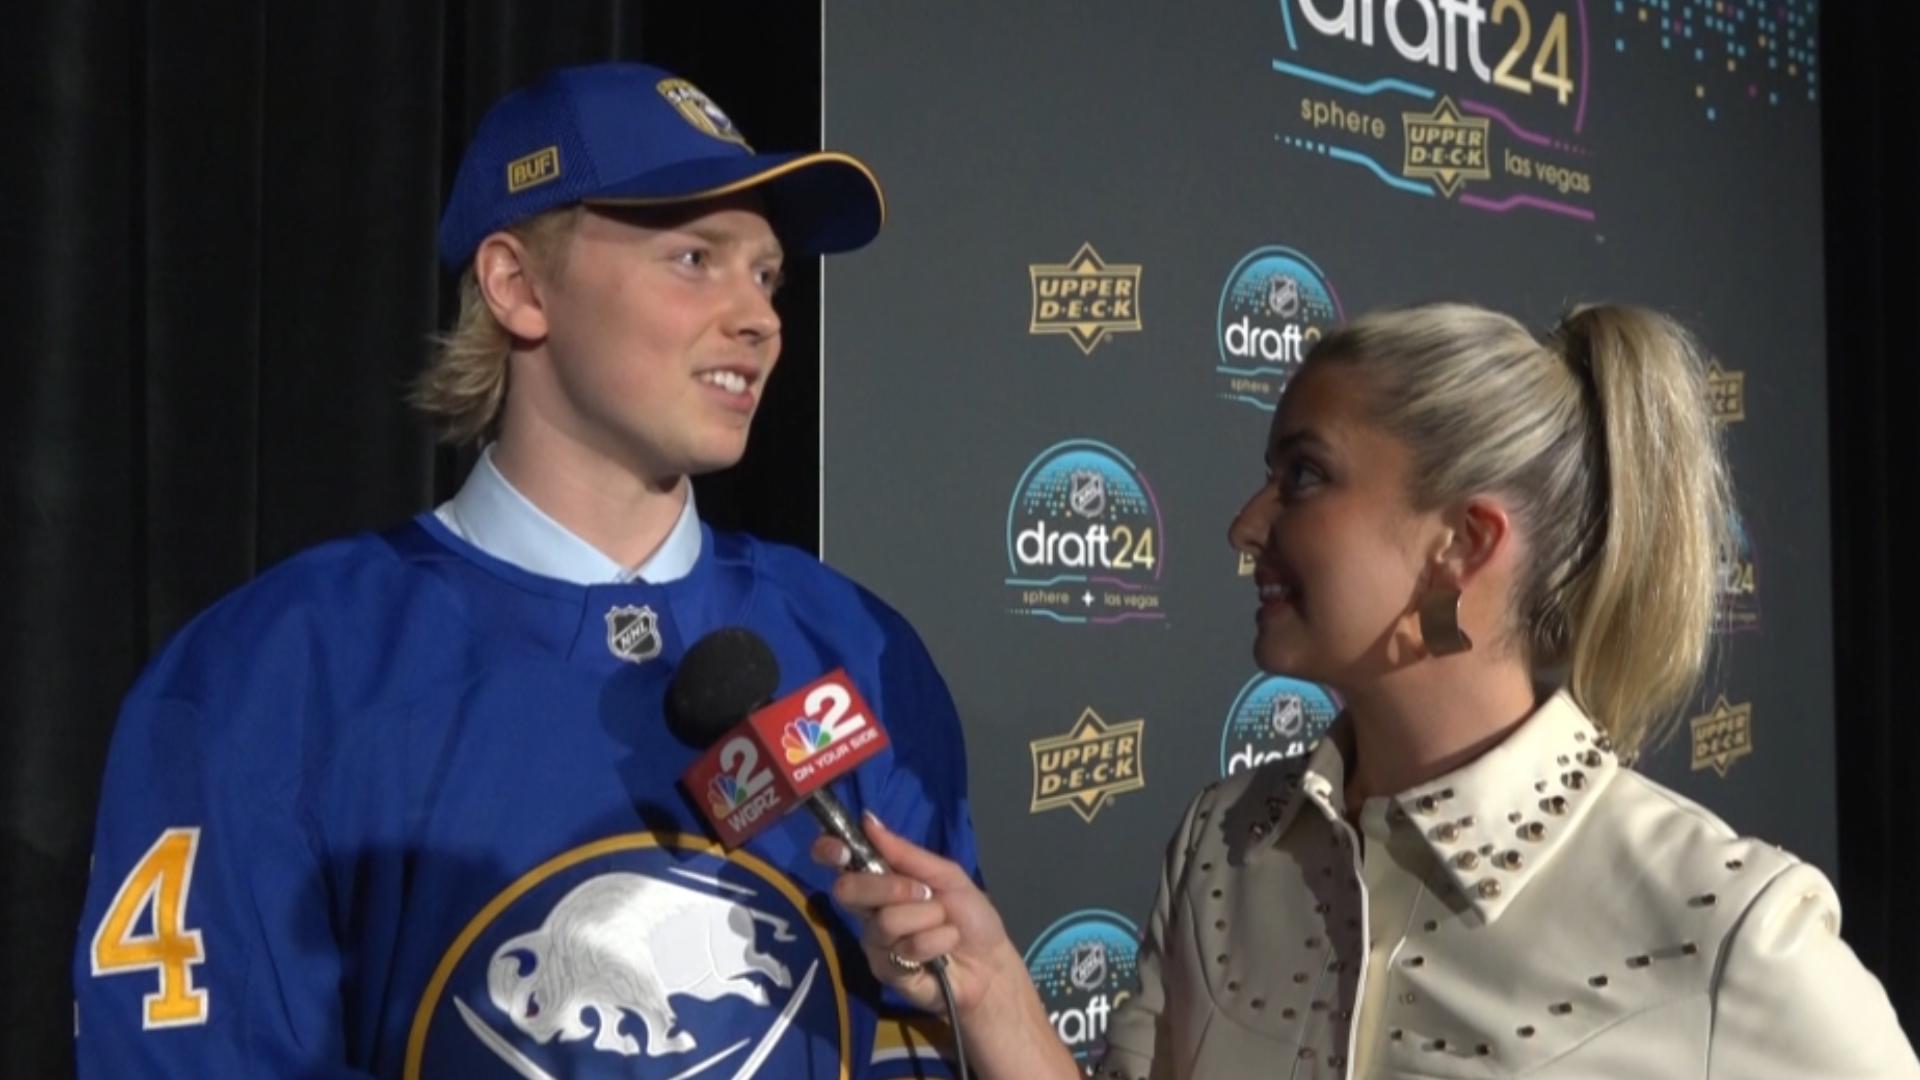 NHL Draft: Get 2 Know Sabres first-round pick Konsta Helenius. 2 On Your Side's Lindsey Moppert talks to Buffalo's top pick in the 2024 NHL Draft.